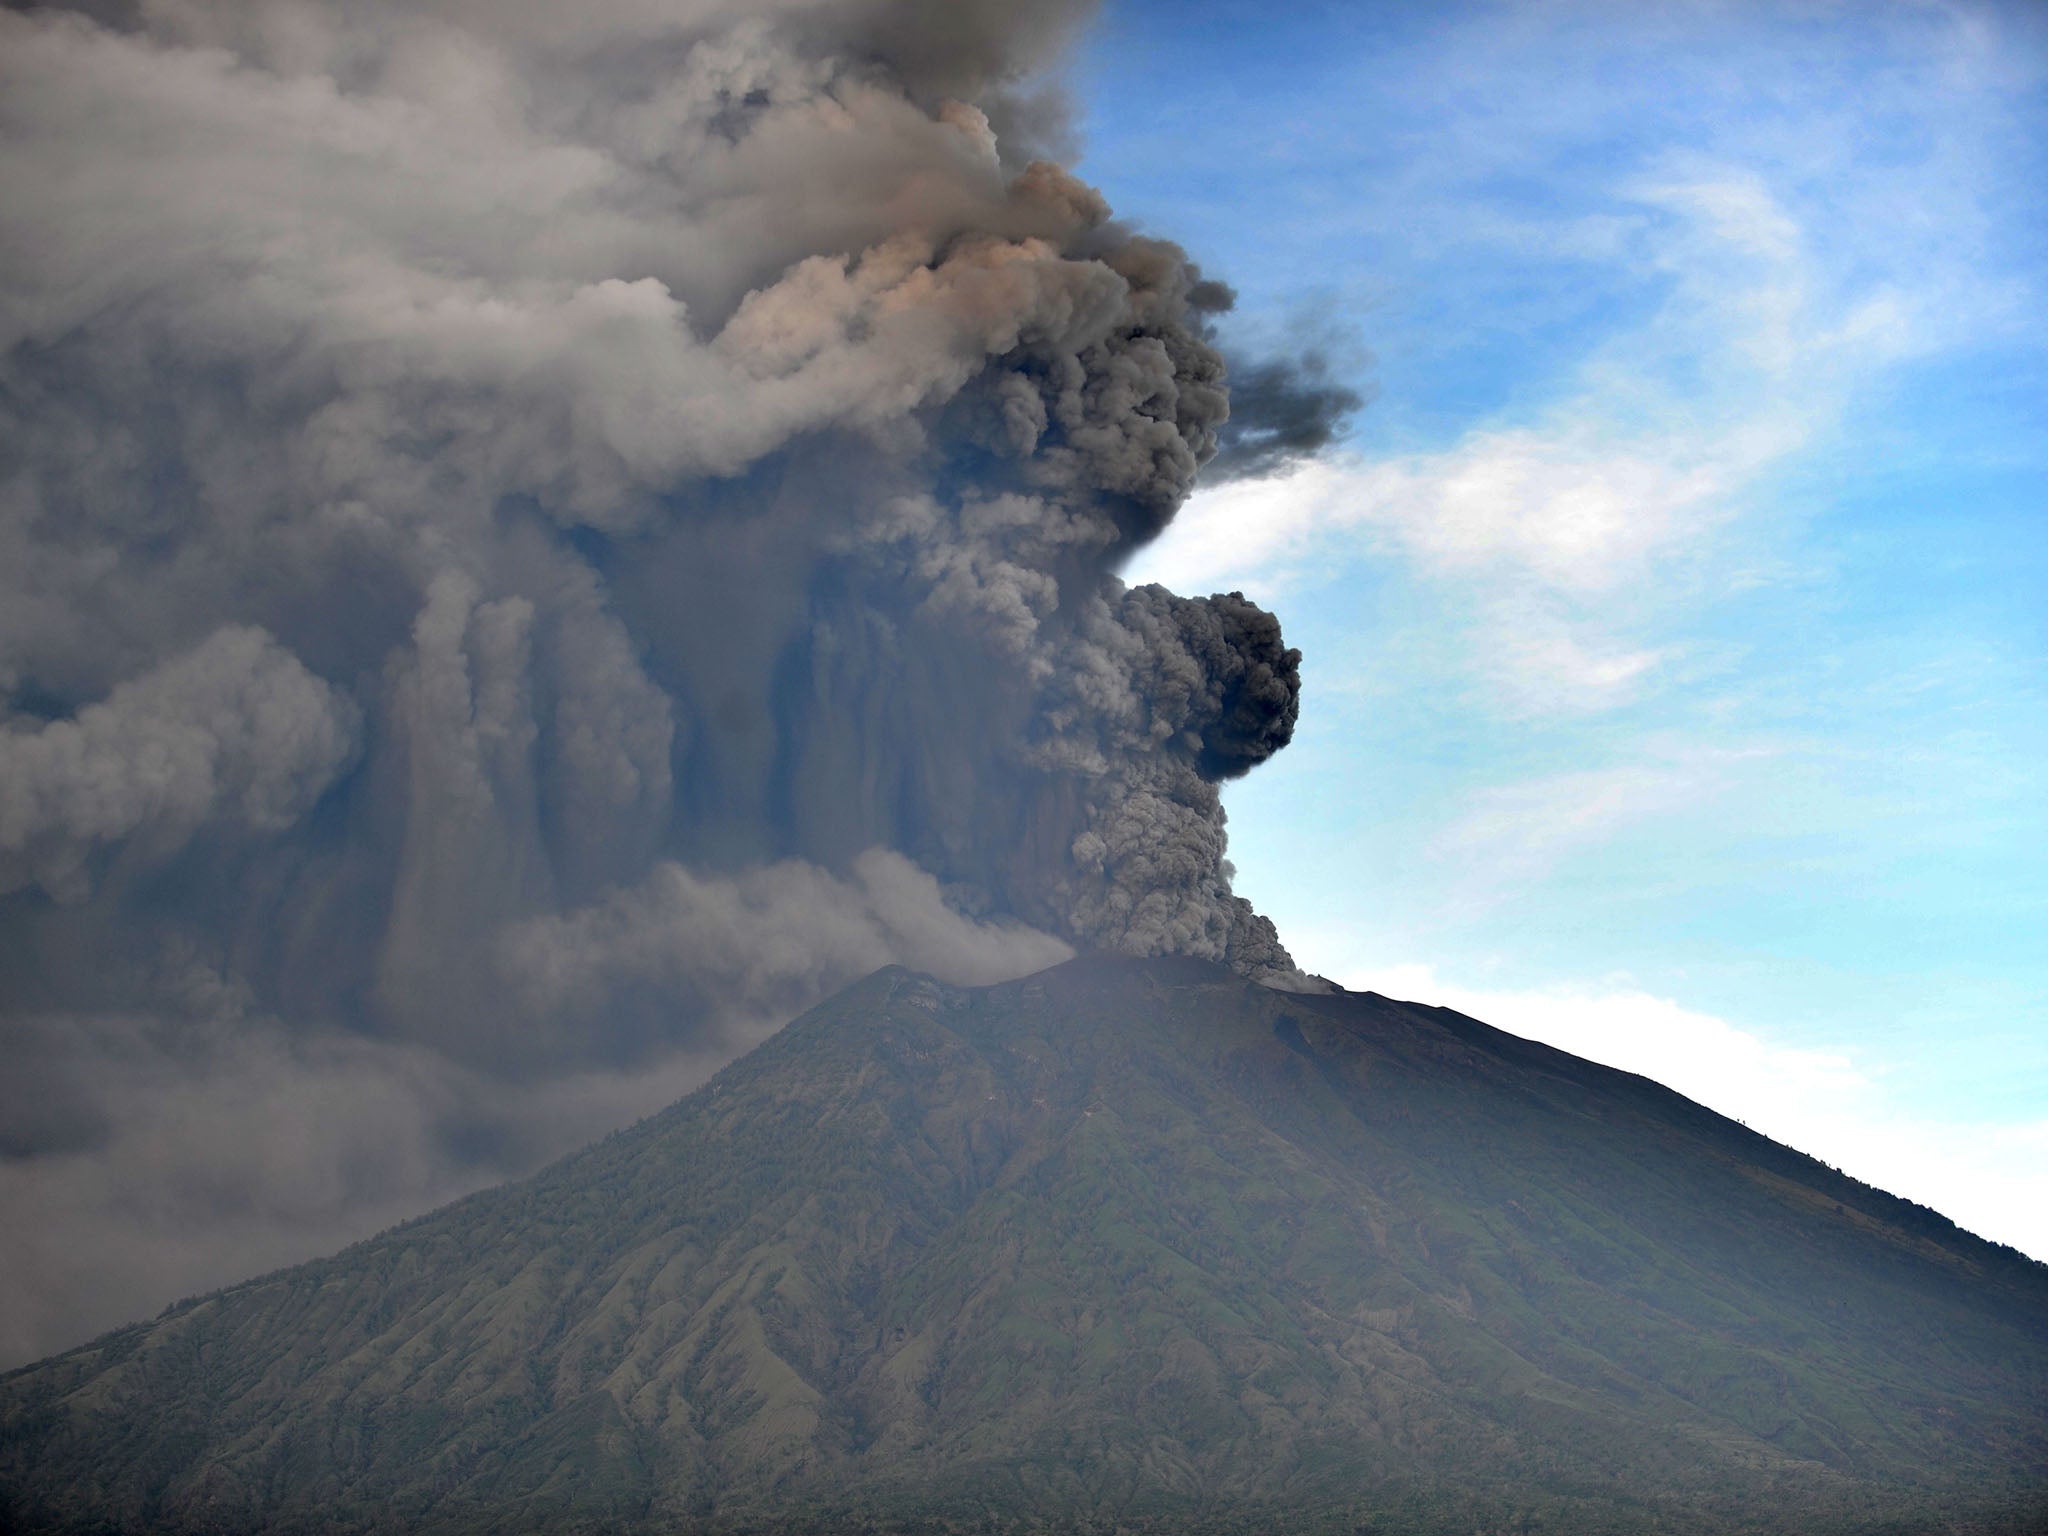 Bali volcano on highest eruption alert as 100,000 told to evacuate